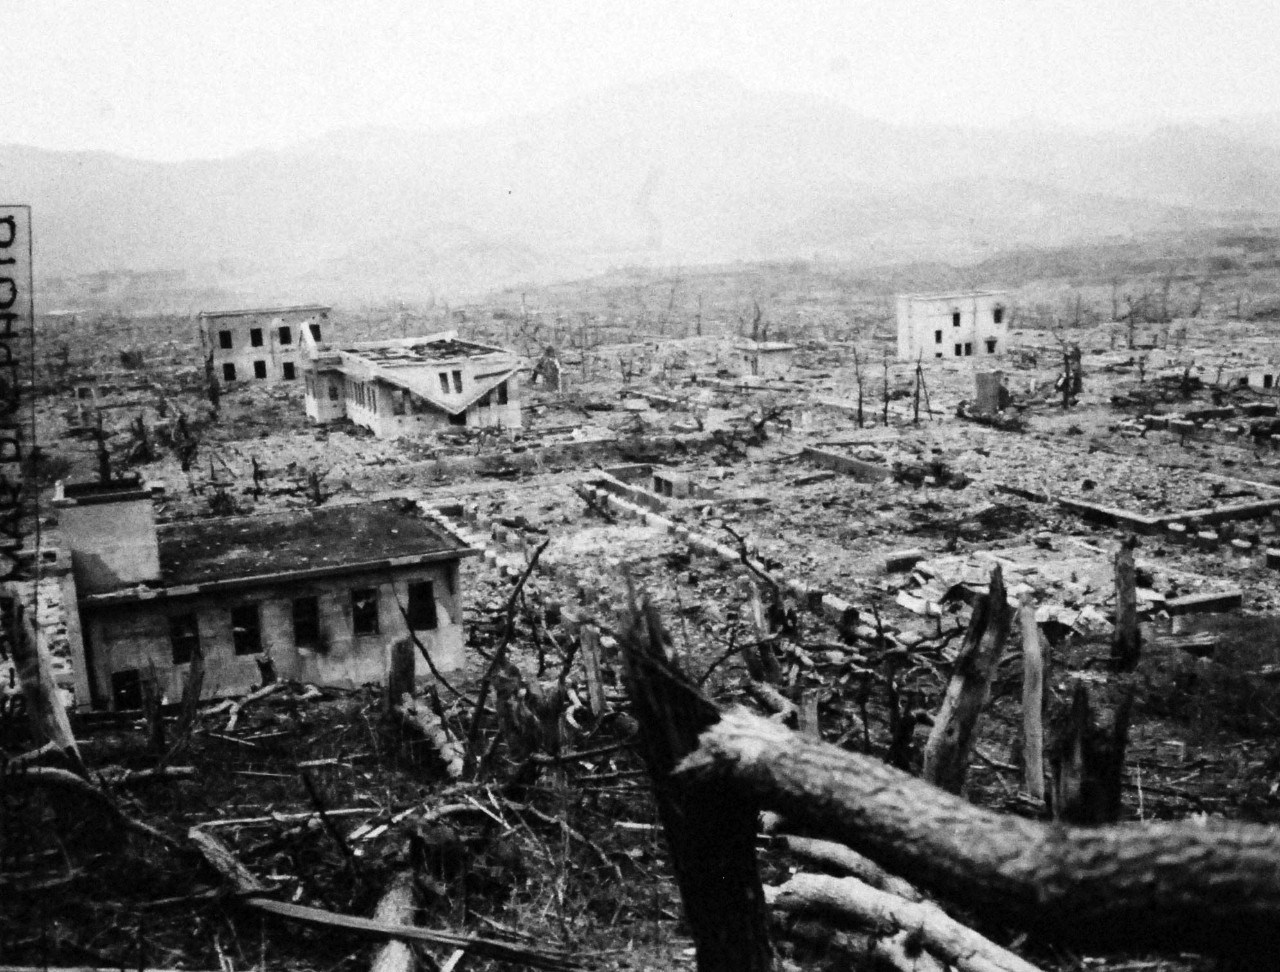 127-GW-1643-147005:     Nagasaki, Japan, 1945.   Nagasaki medical hospital and college after Atomic blast, Japan.   Photographed by Rogers, November 23, 1945.        Official U.S. Marine Corps Photograph, now in the collections of the National Archives.  (2016/10/25).